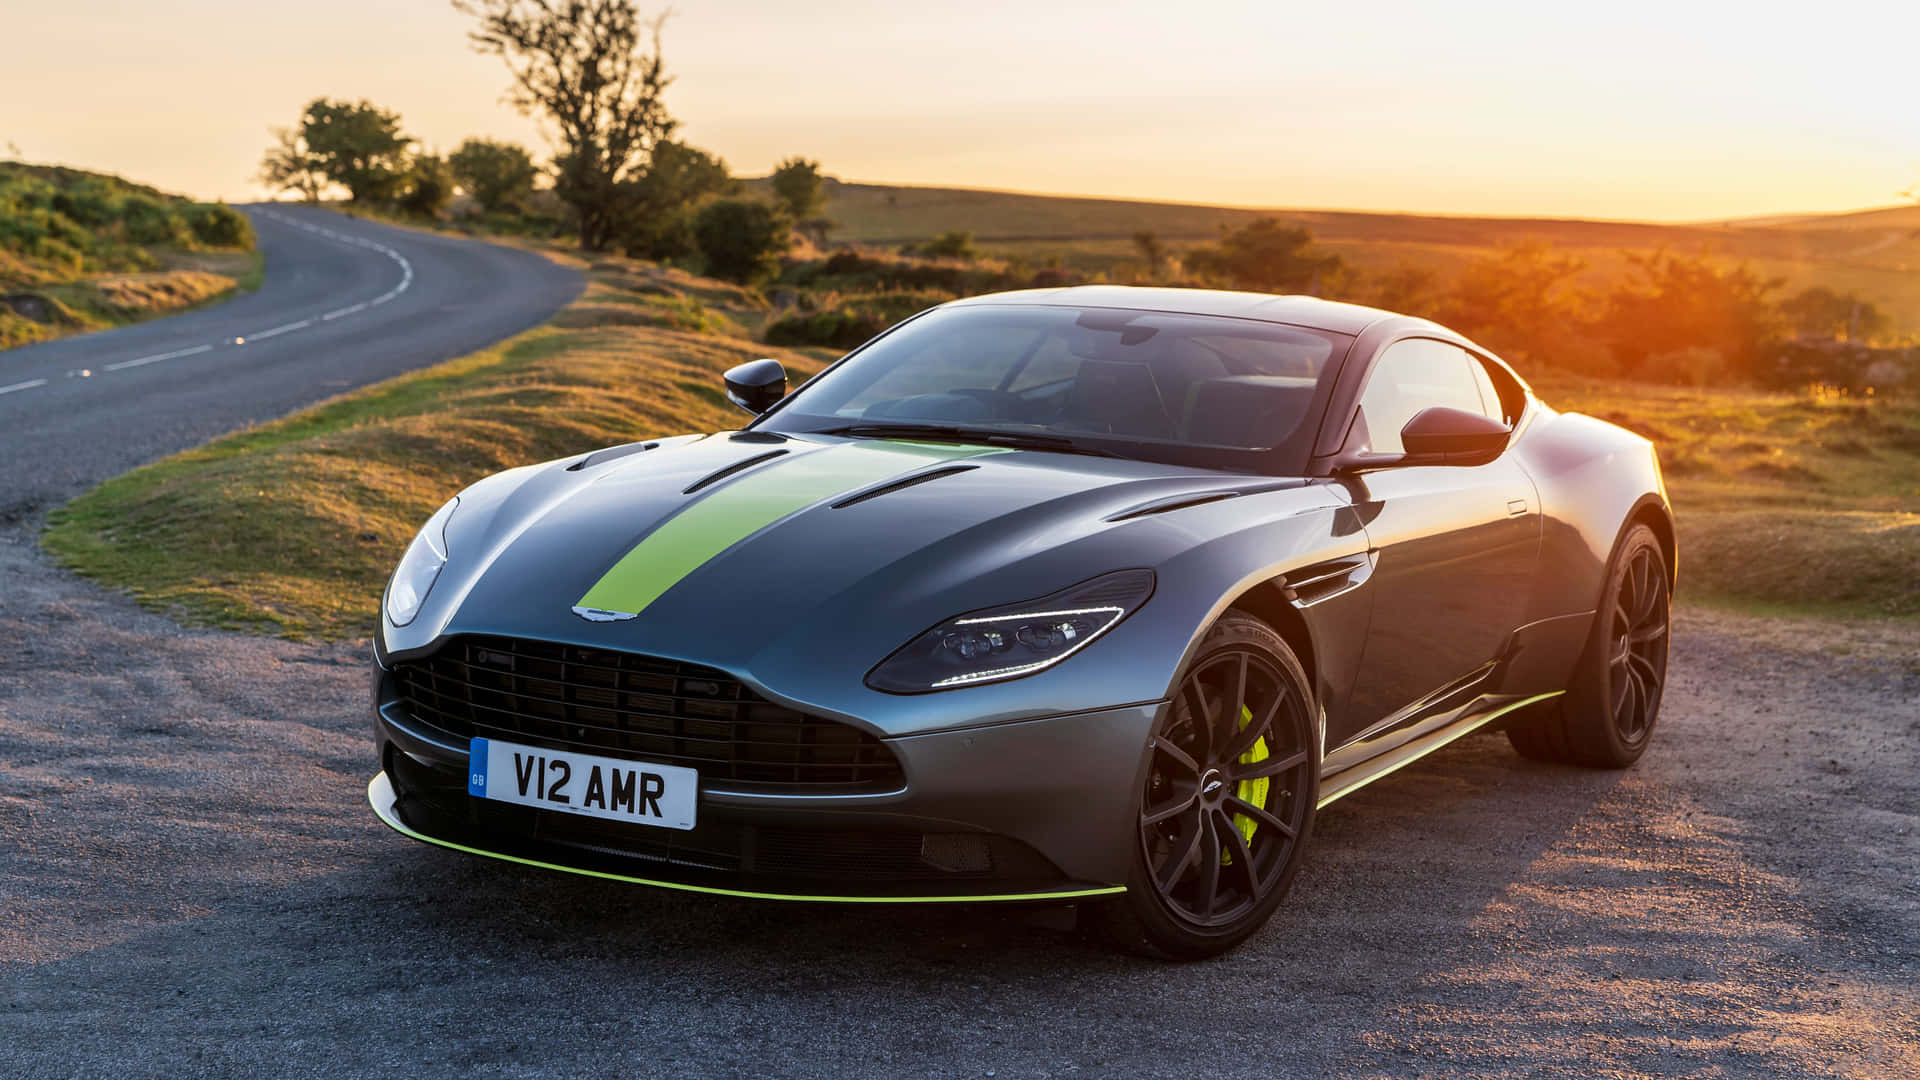 Caption: Aston Martin DB11 Accelerating in Style Wallpaper